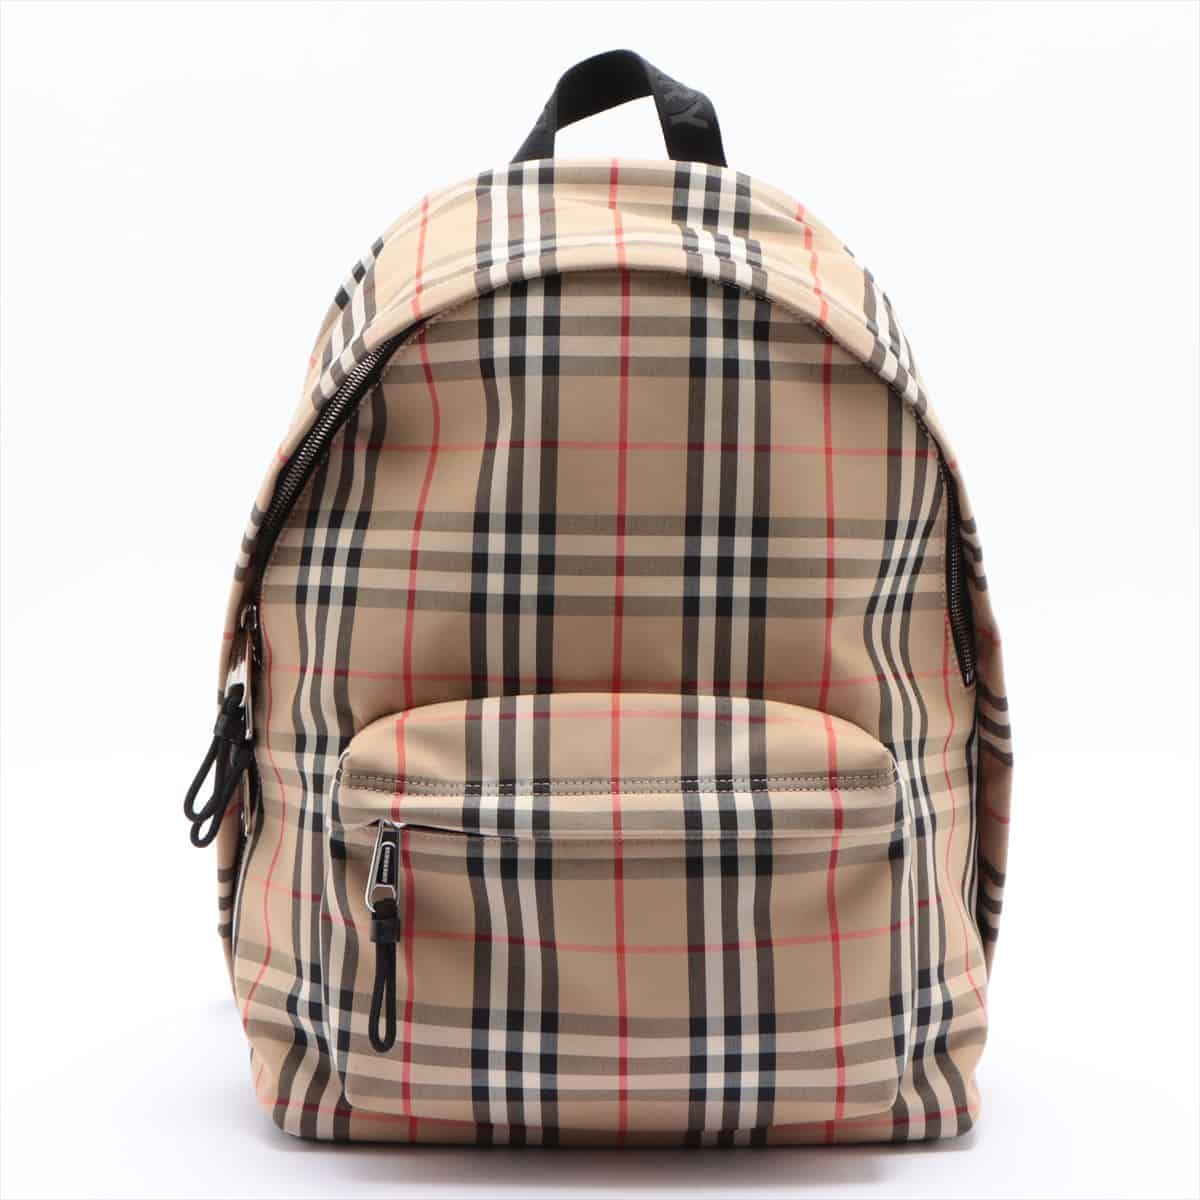 Burberry canvas Backpack Beige